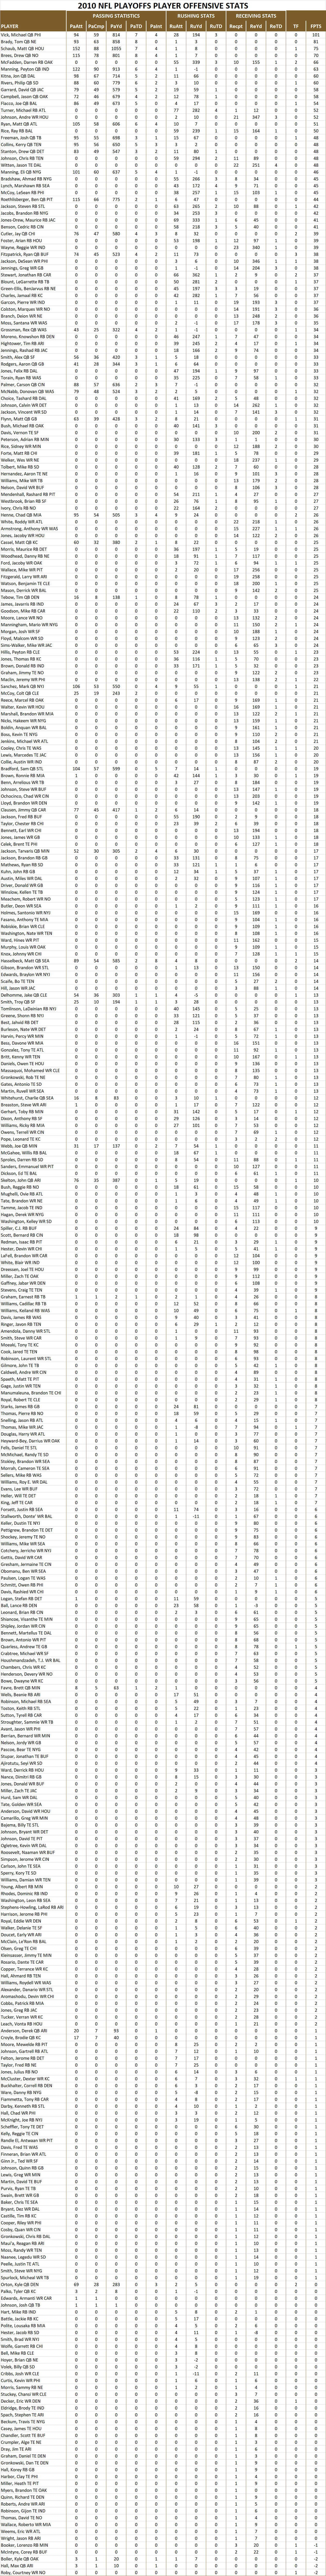 2010 National Football League Pool Playoff Player Offensive Stats